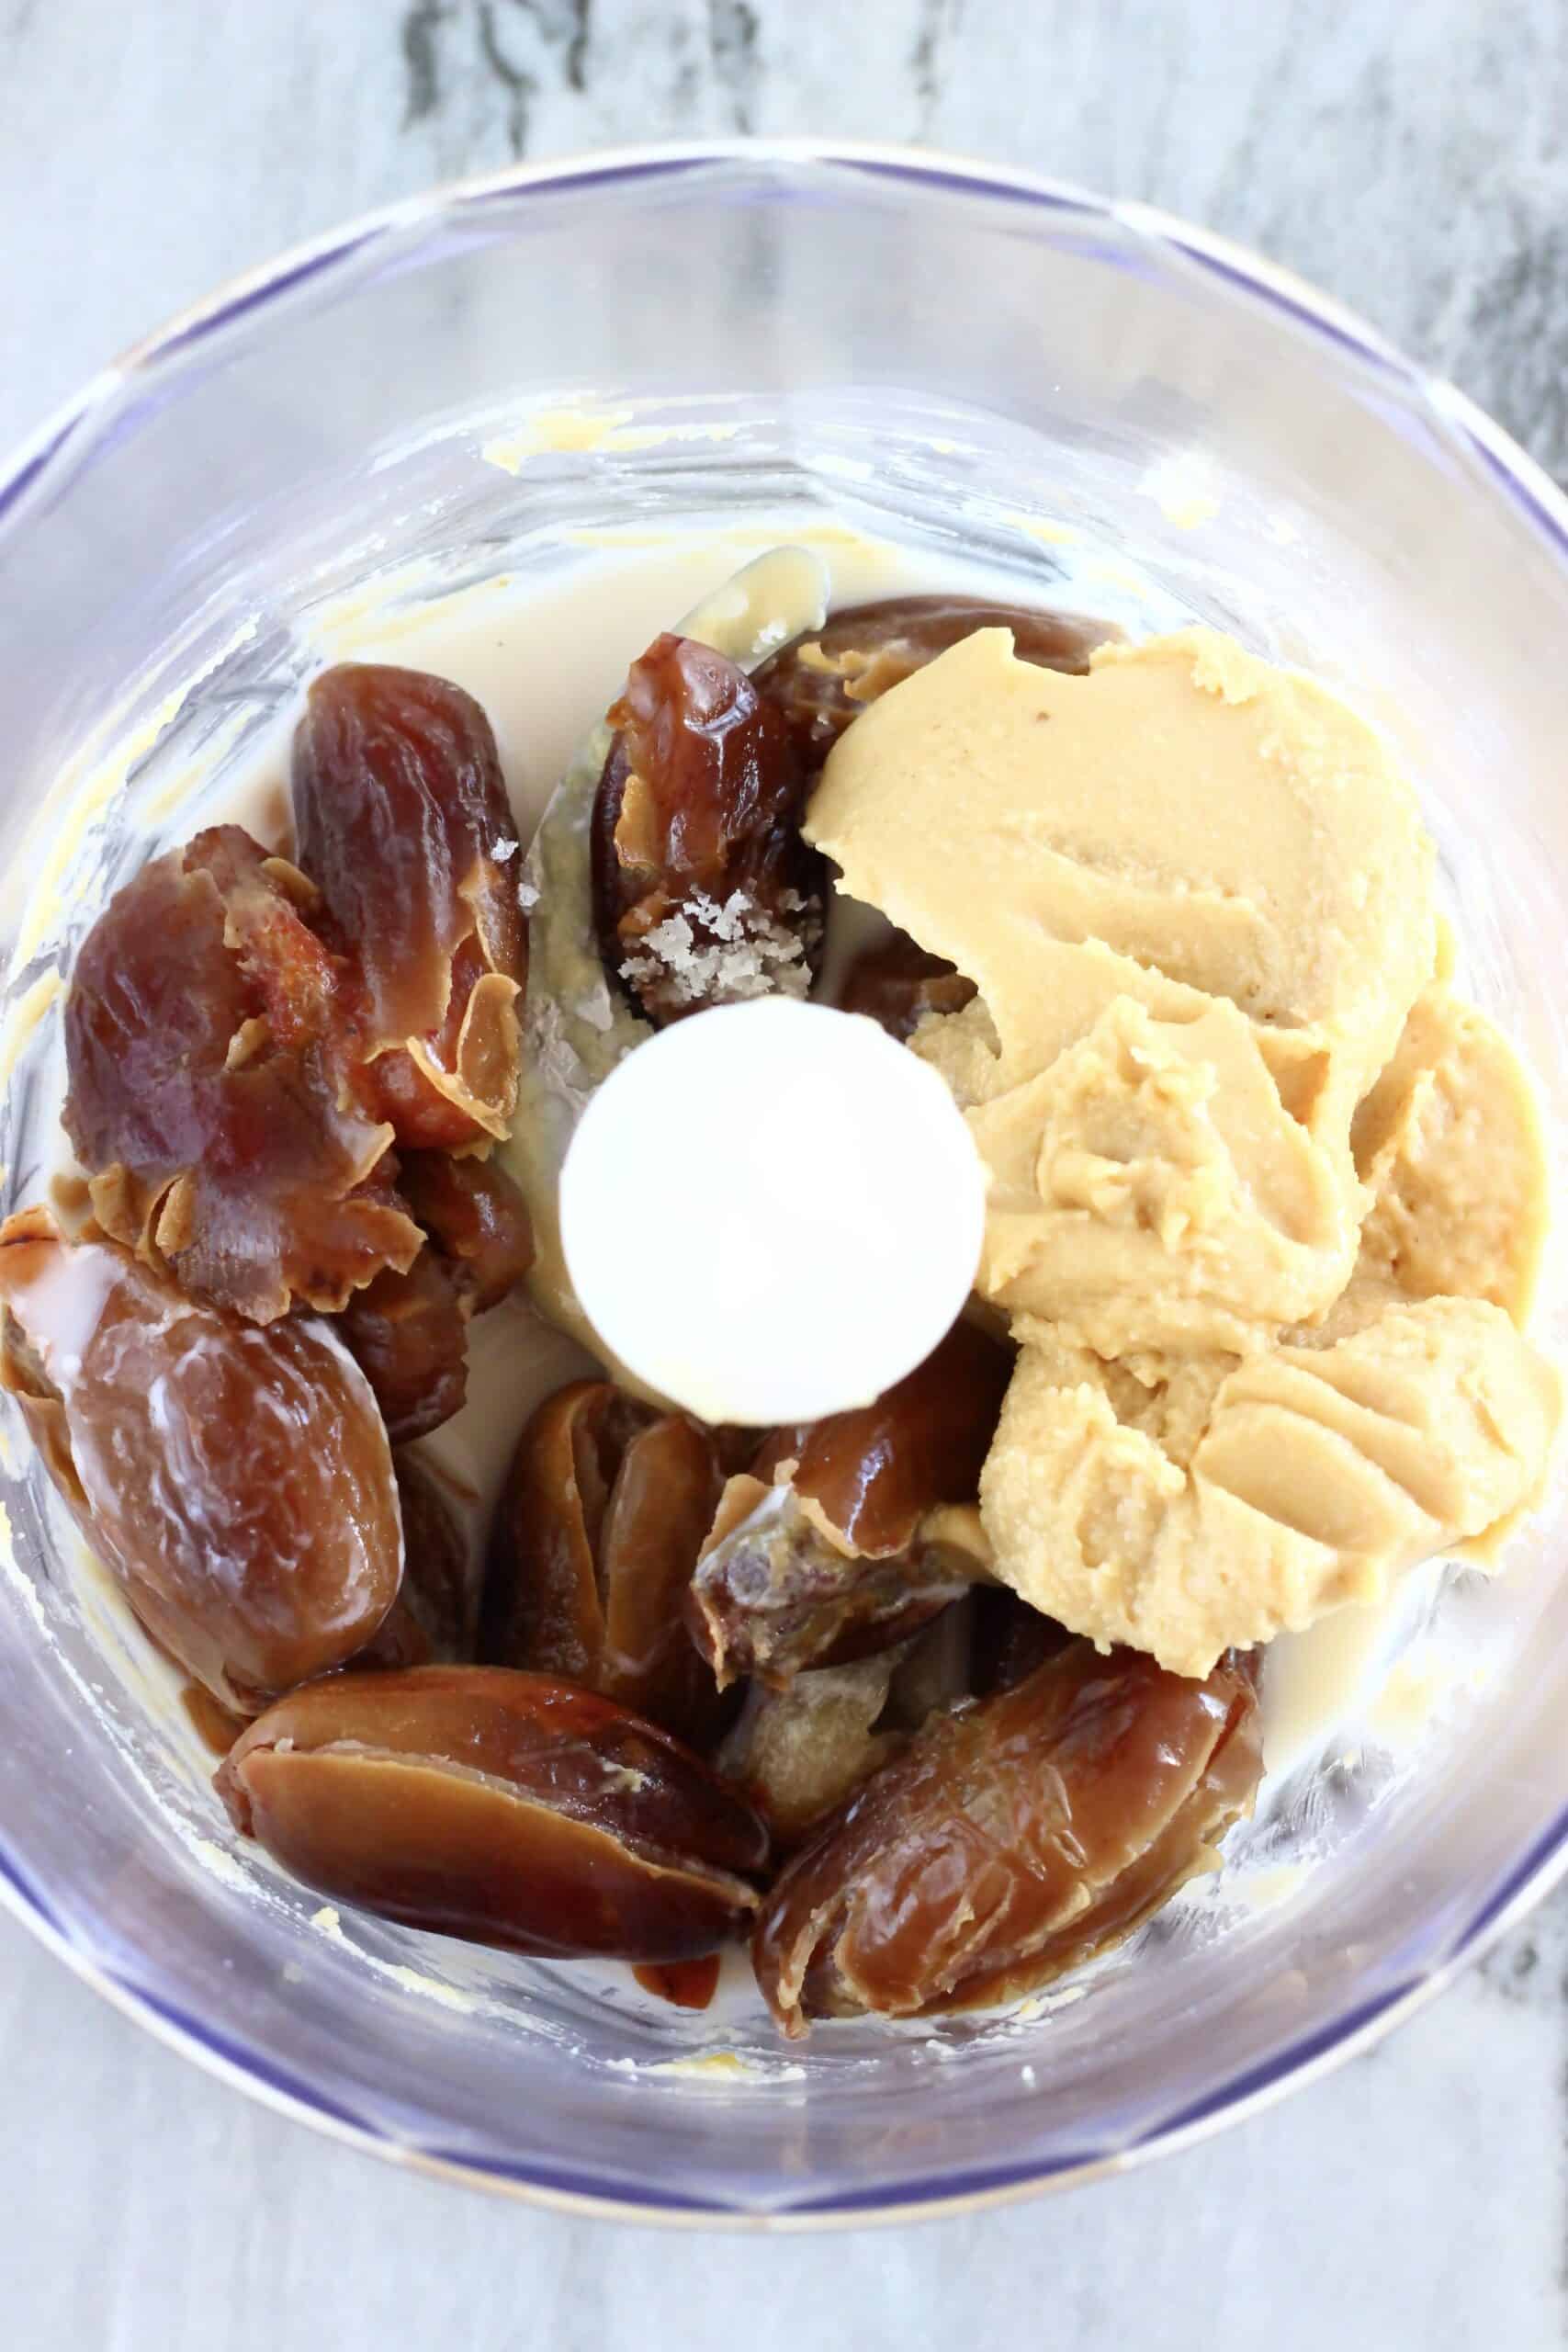 Dates, almond butter and almond milk in a food processor